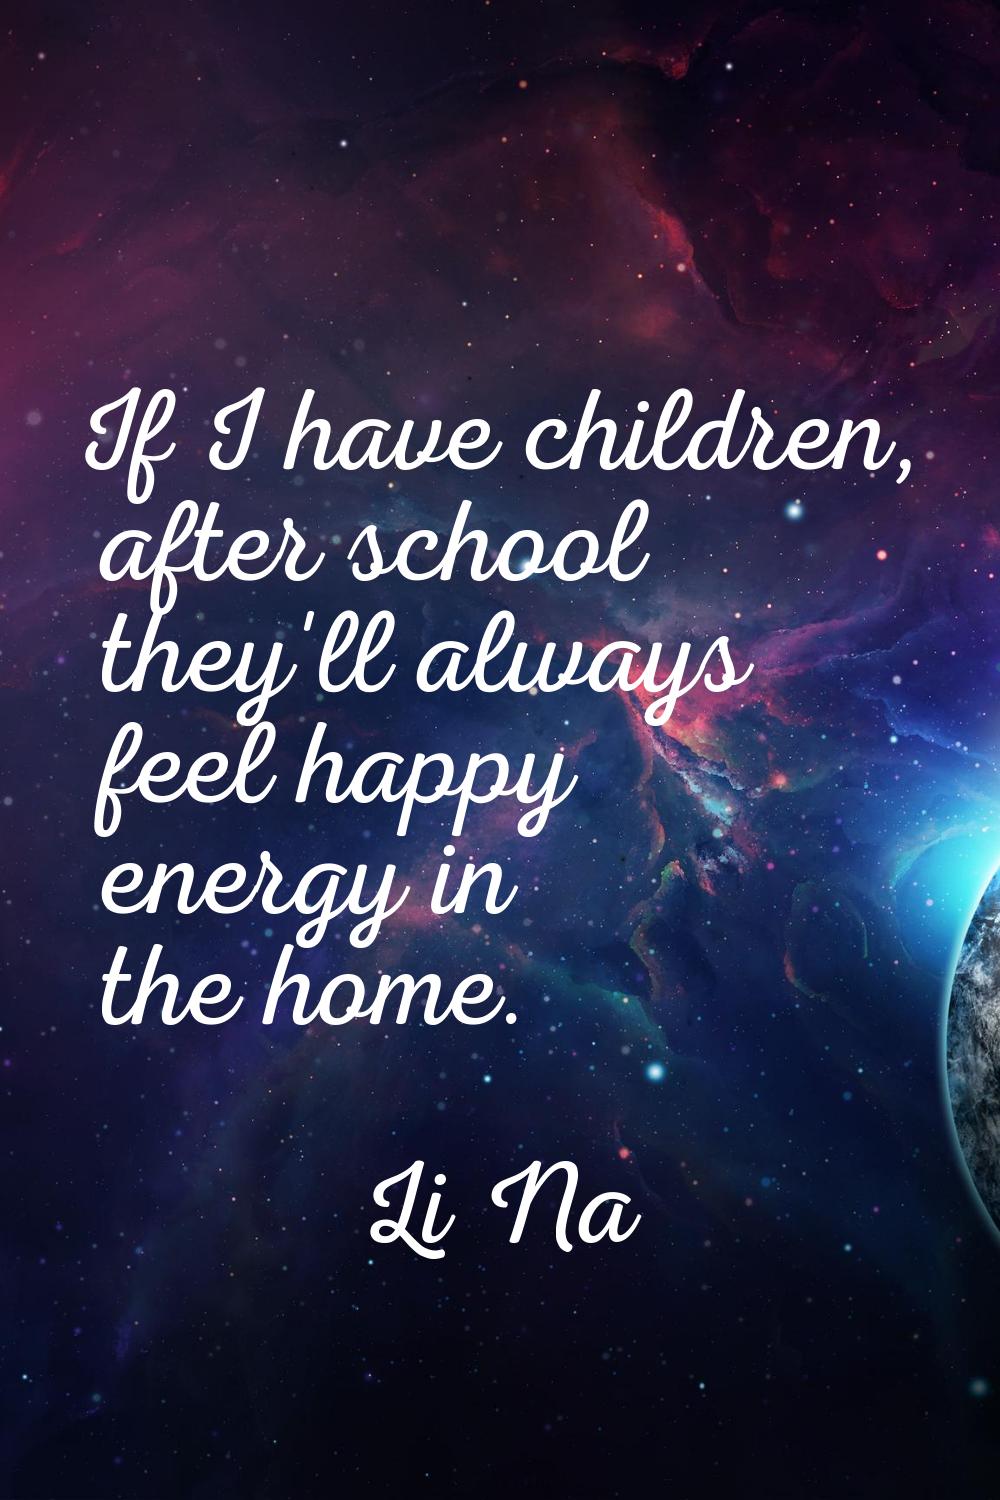 If I have children, after school they'll always feel happy energy in the home.